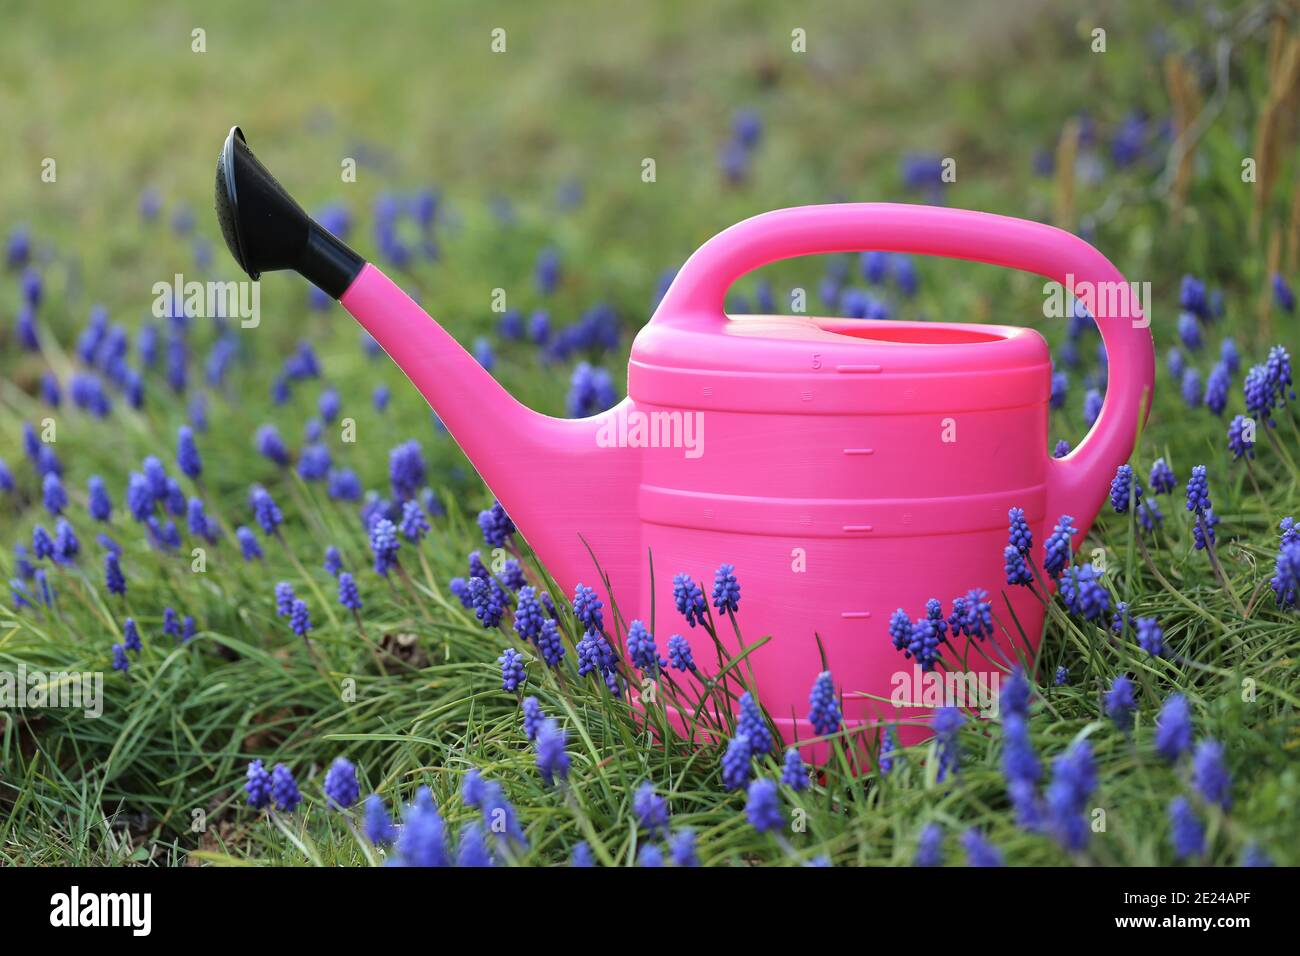 Spring garden work.Floriculture and horticulture . Muscari flowers cultivation and care. Planting and watering. Pink watering can in muscari flowers Stock Photo